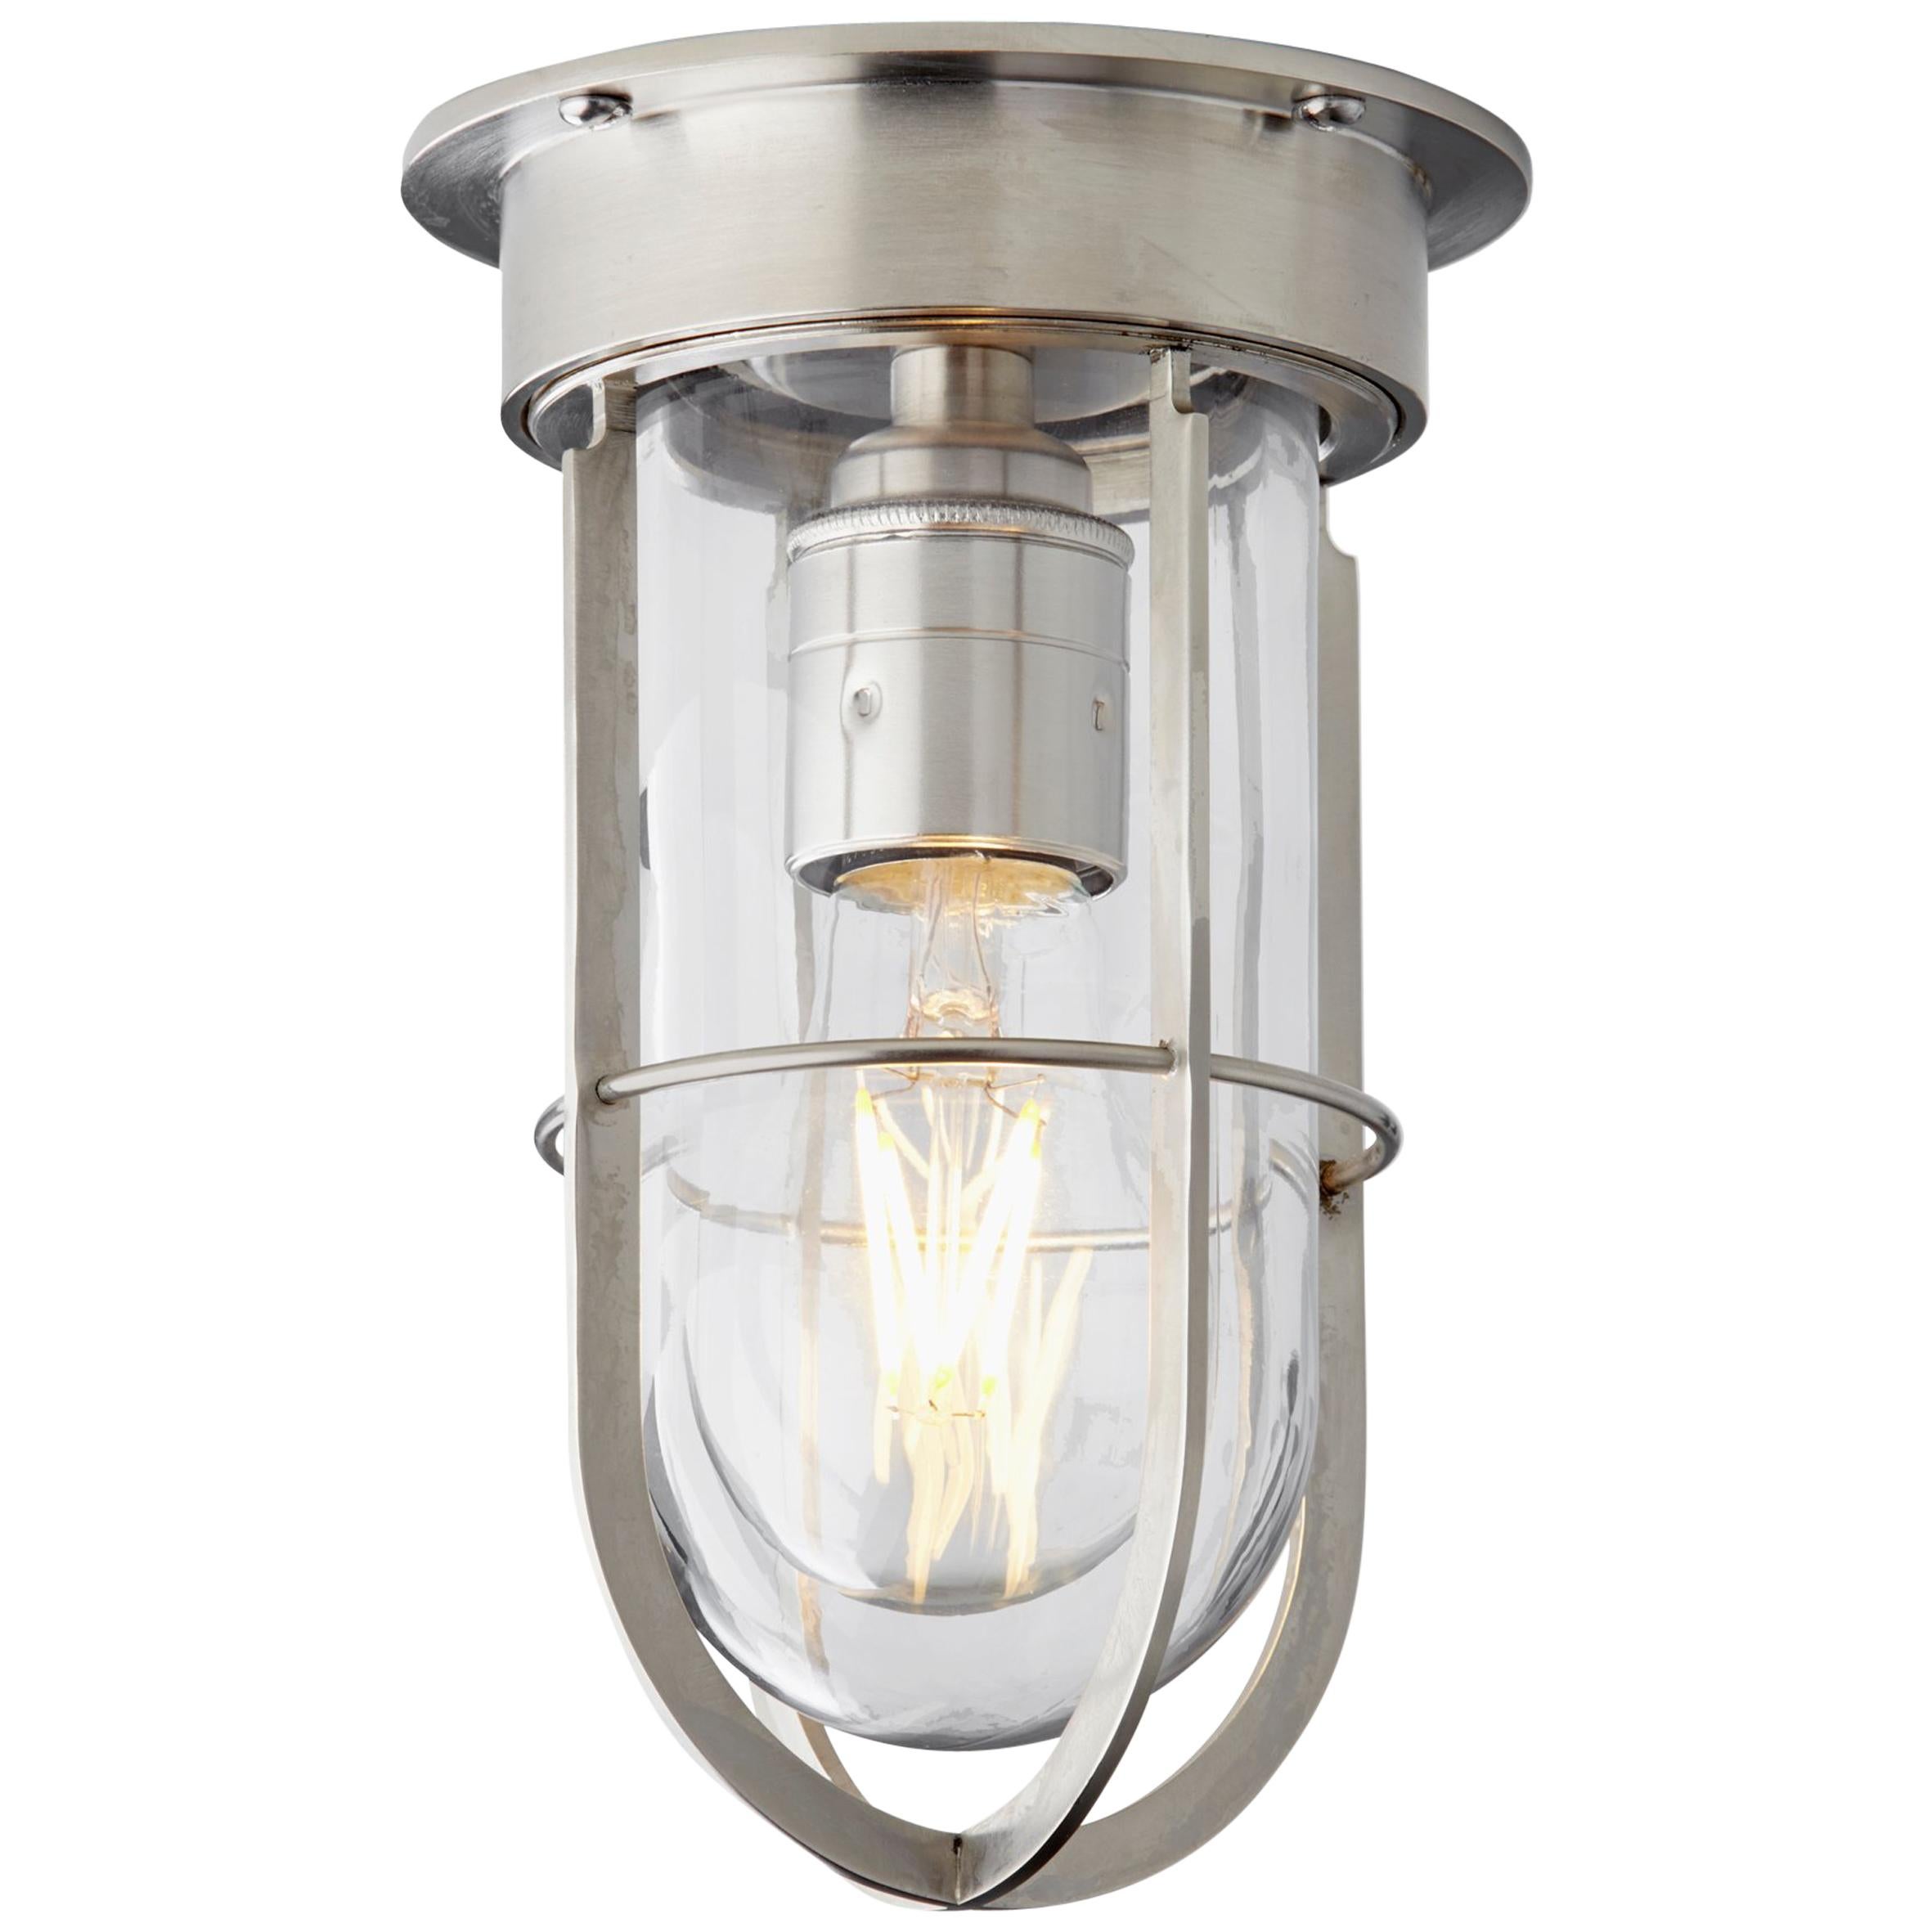 Tekna Docklight Ceiling Light with Brushed Nickel Finish and Clear Glass For Sale